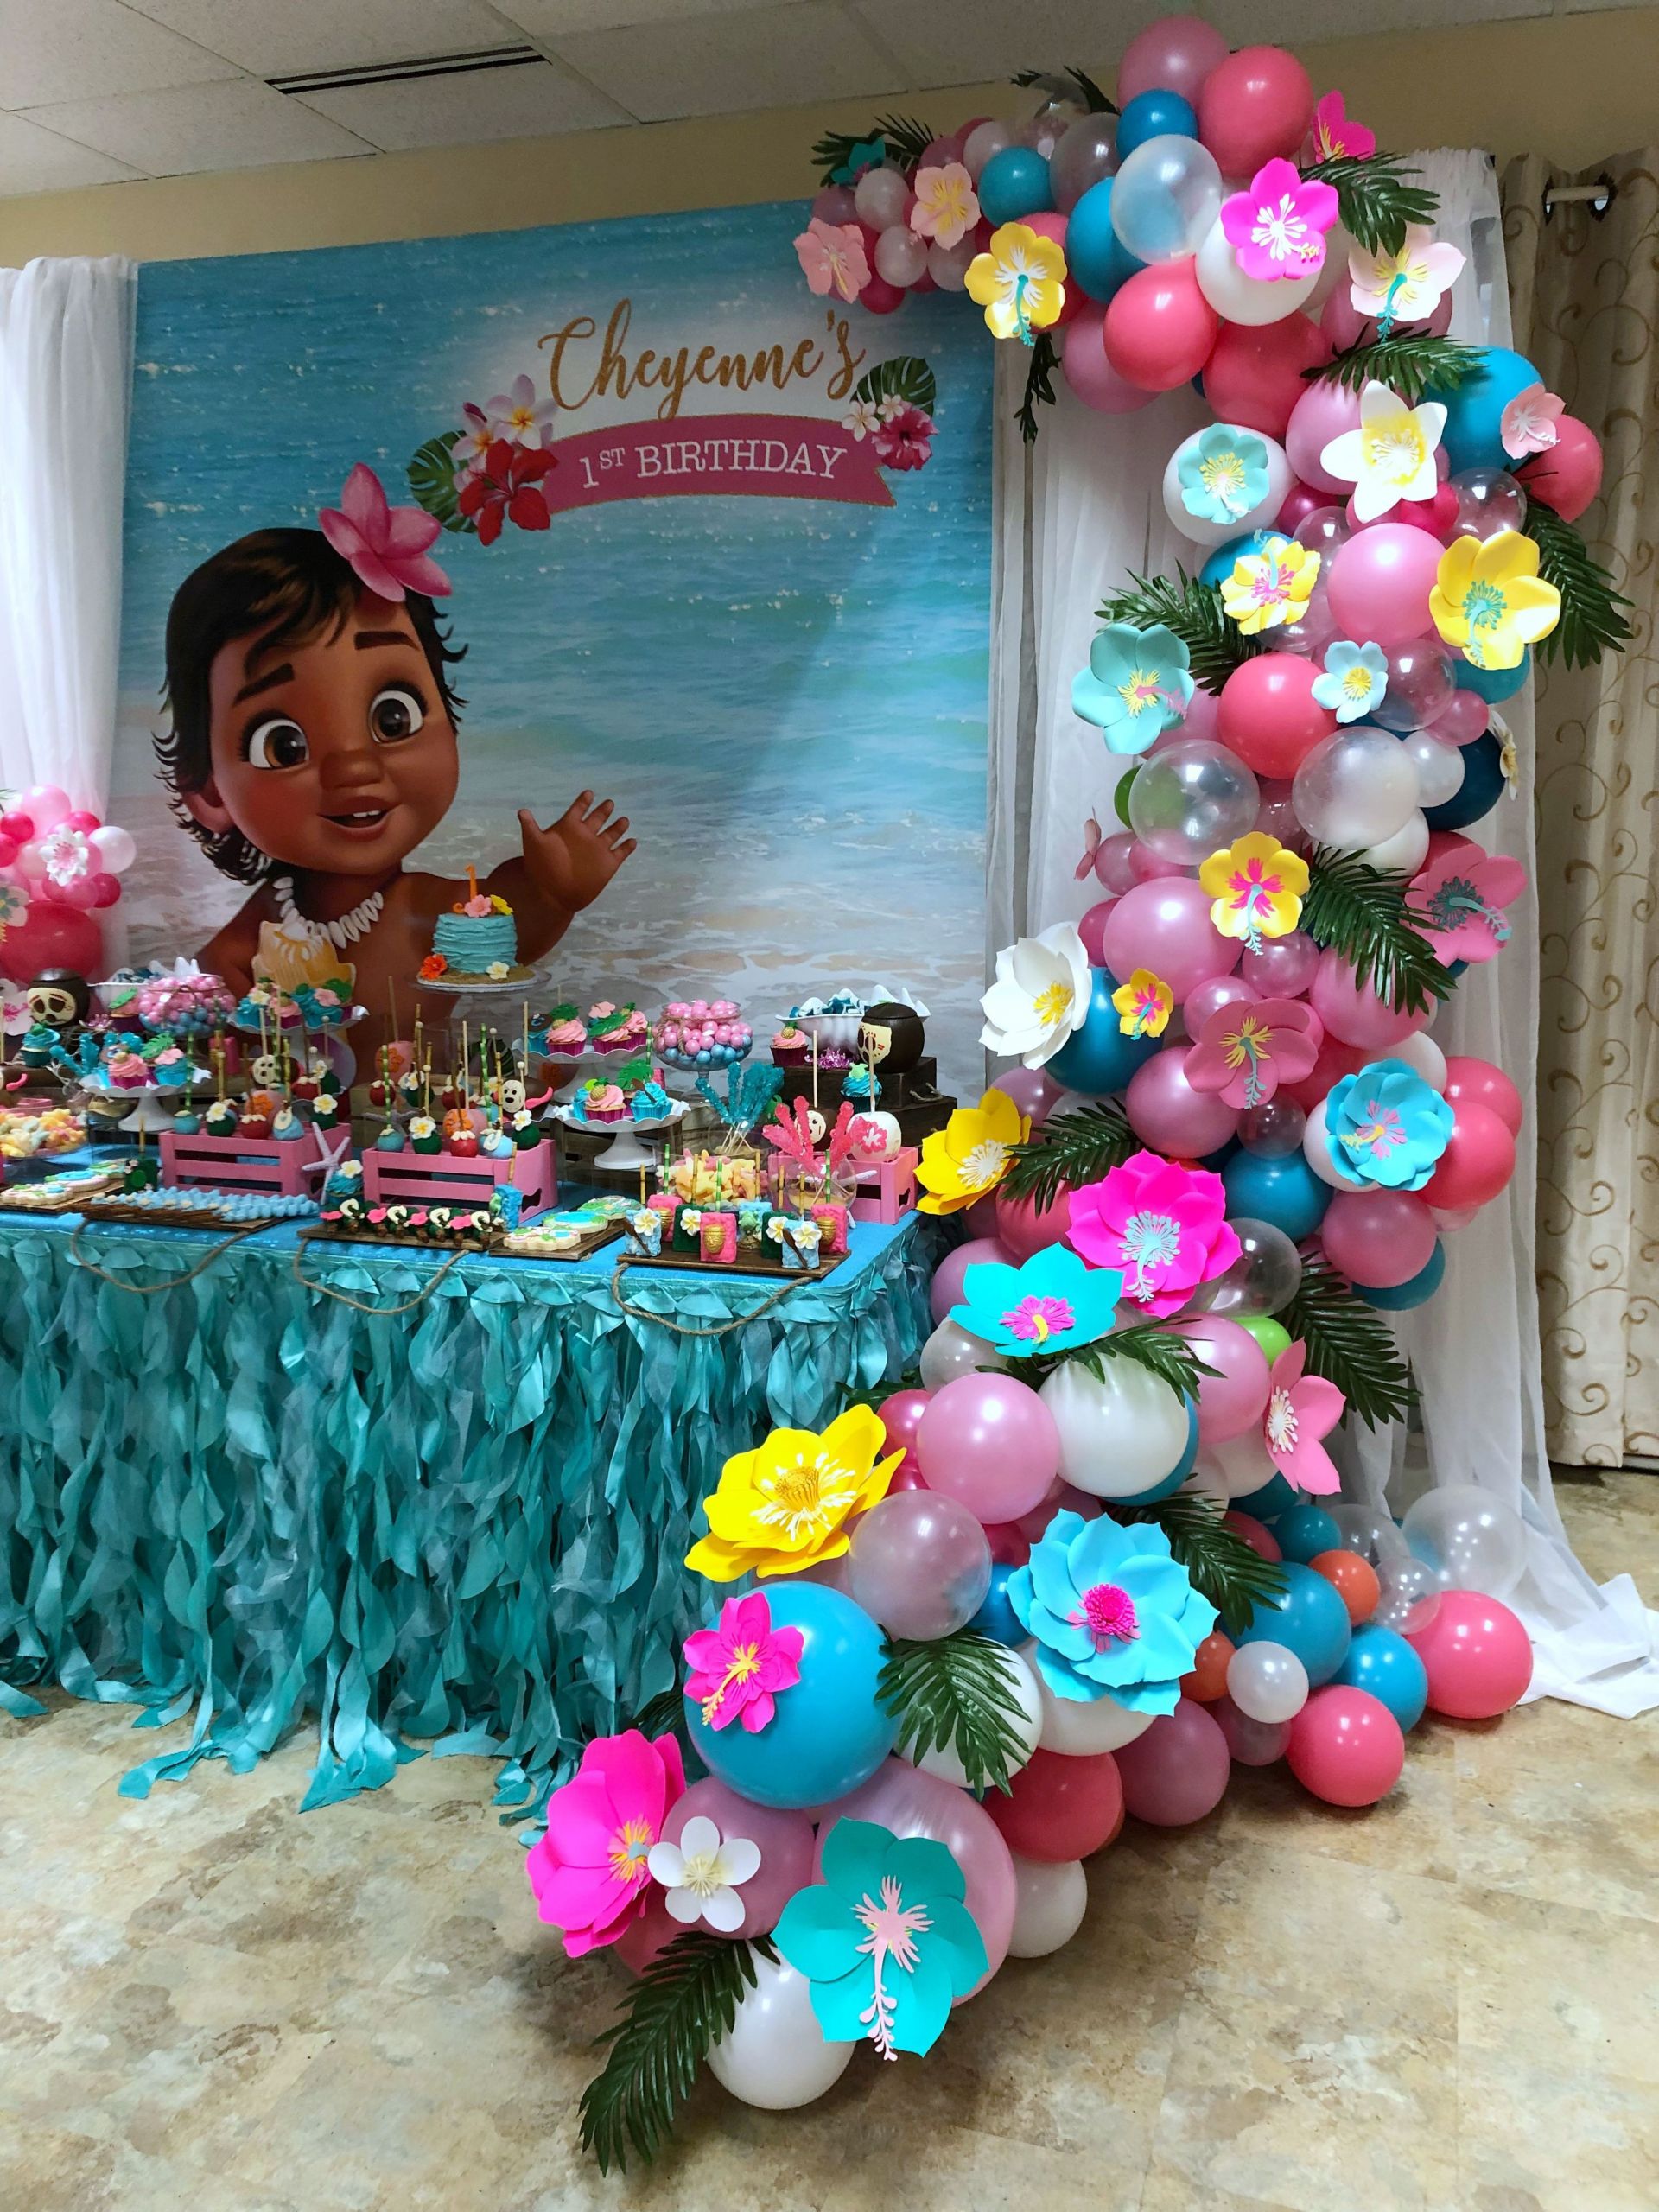 Baby Moana Party Decorations
 Moana Themed Balloon Garland with Paper Flowers by